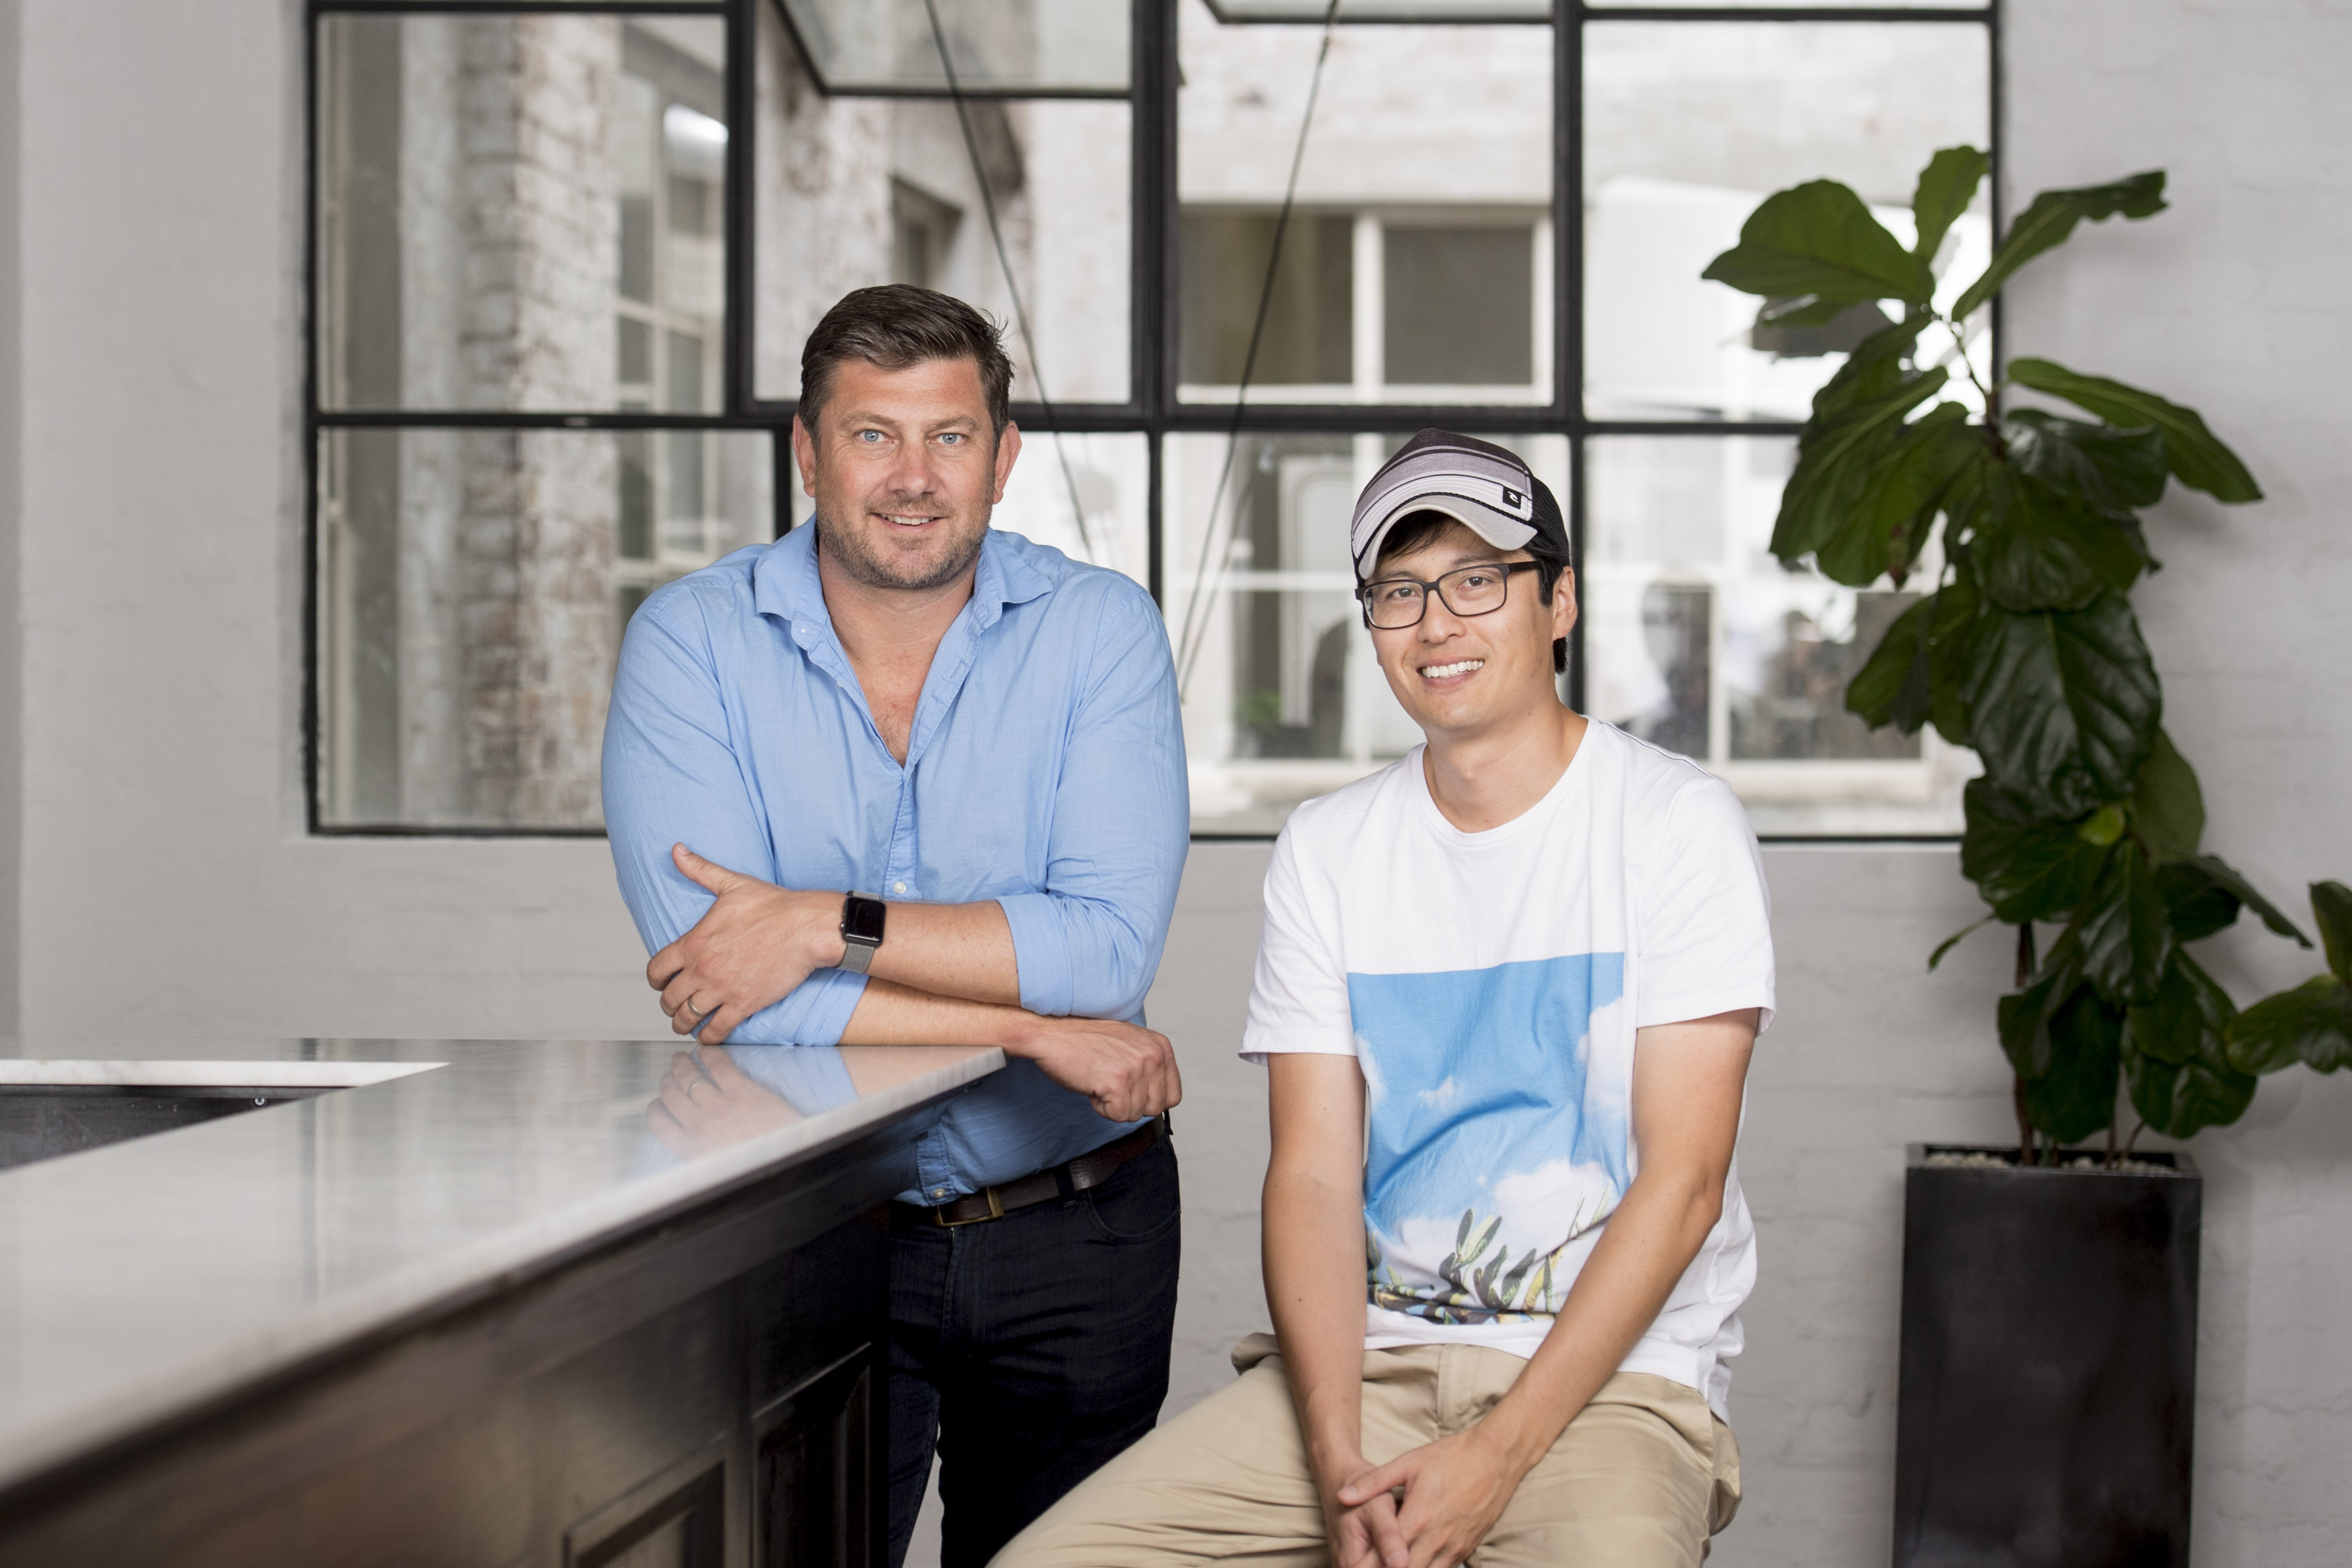 Employment Hero co-founders Ben Thompson (left) and Dave Tong